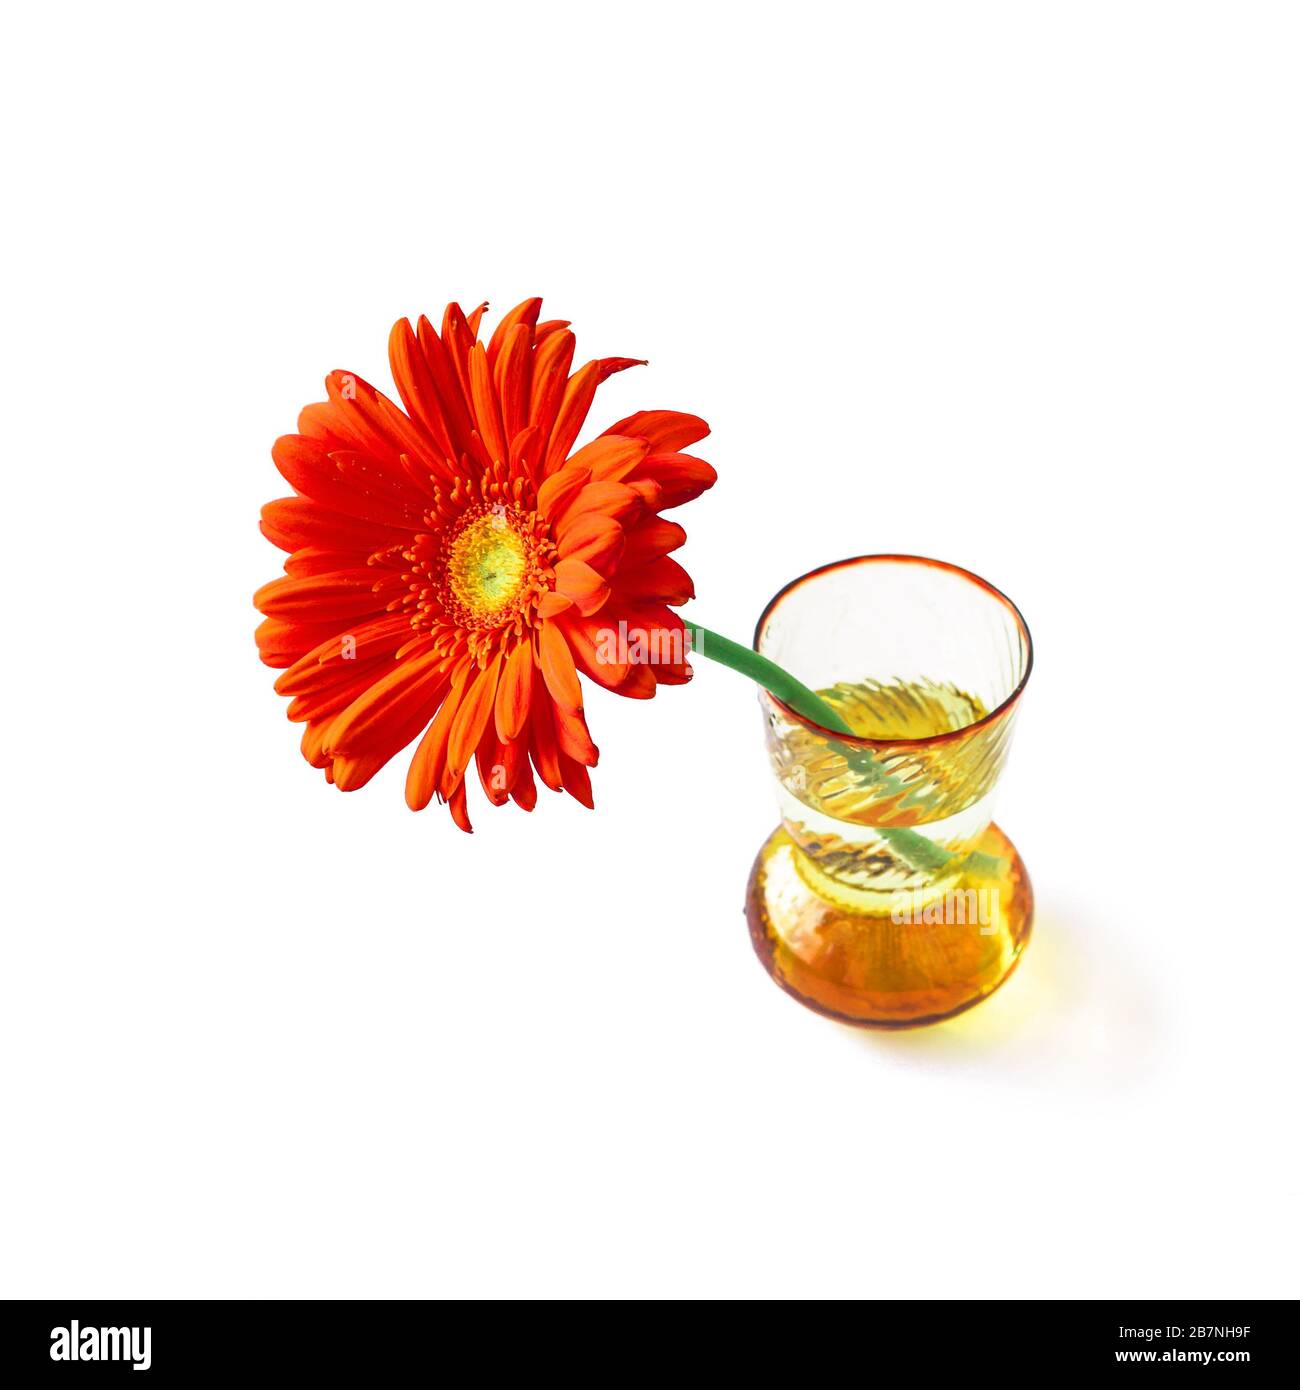 Orange gerbera in vase isolated on white background for decoration design. Single Spring Flower cut out on backdrop. One Bright daisy like romance gift in glass pot. Floral Home decor stock picture. Stock Photo